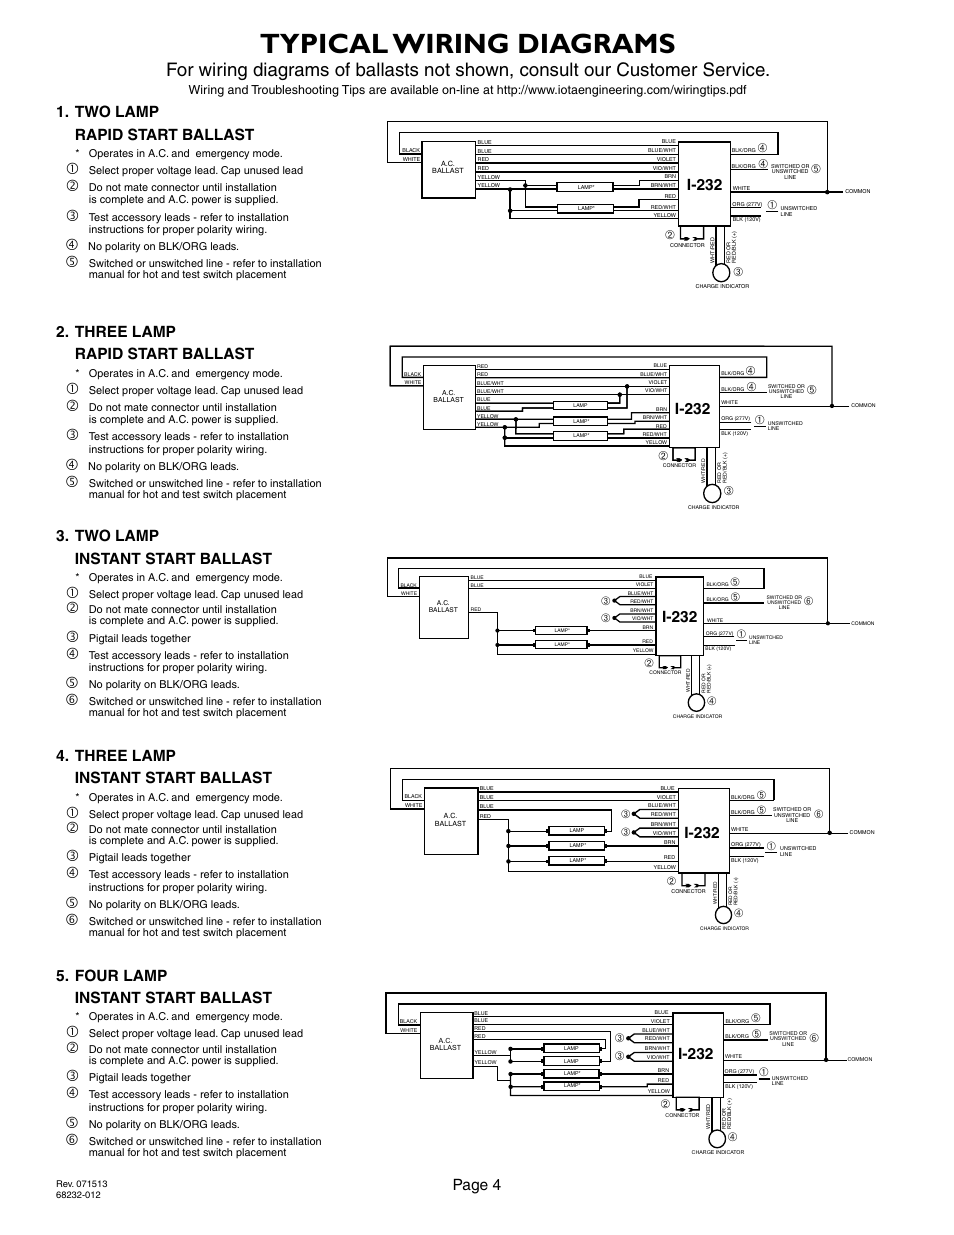 Typical Wiring Diagrams  Page 4  I